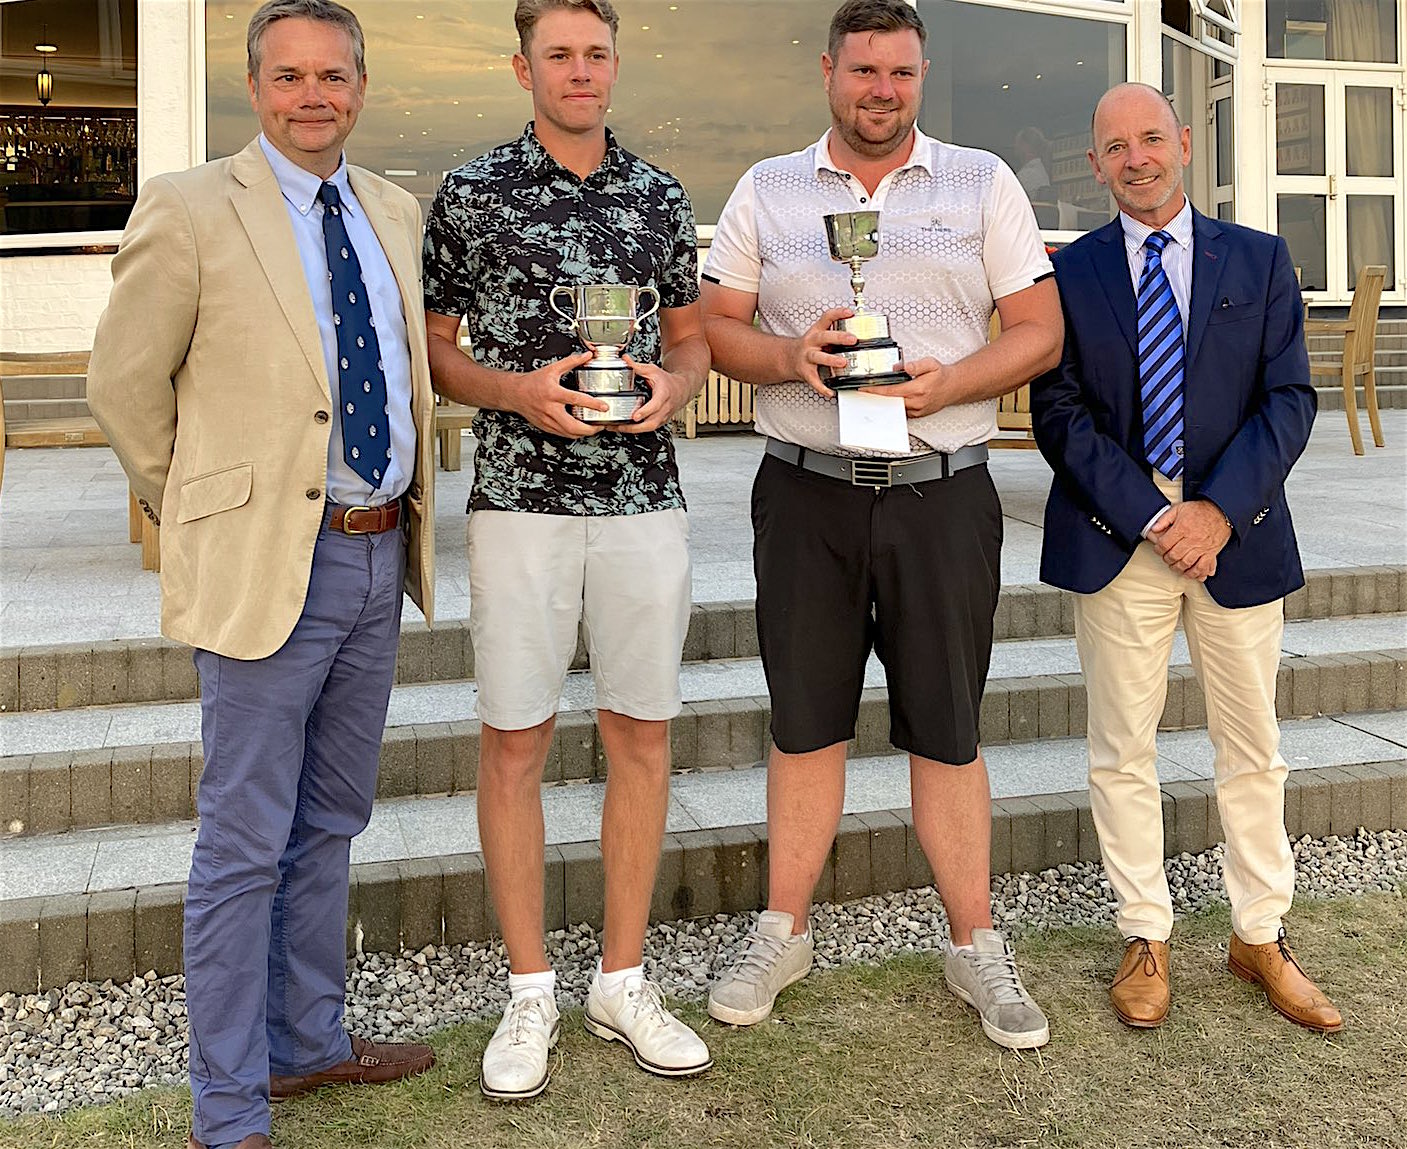 QUALITY WINNERS: Birkdale Goblet champion Jack Brooks (second right) with North West Links champion Callan Barrow and the captains of Royal Birkdale (left) and Hillside (right)